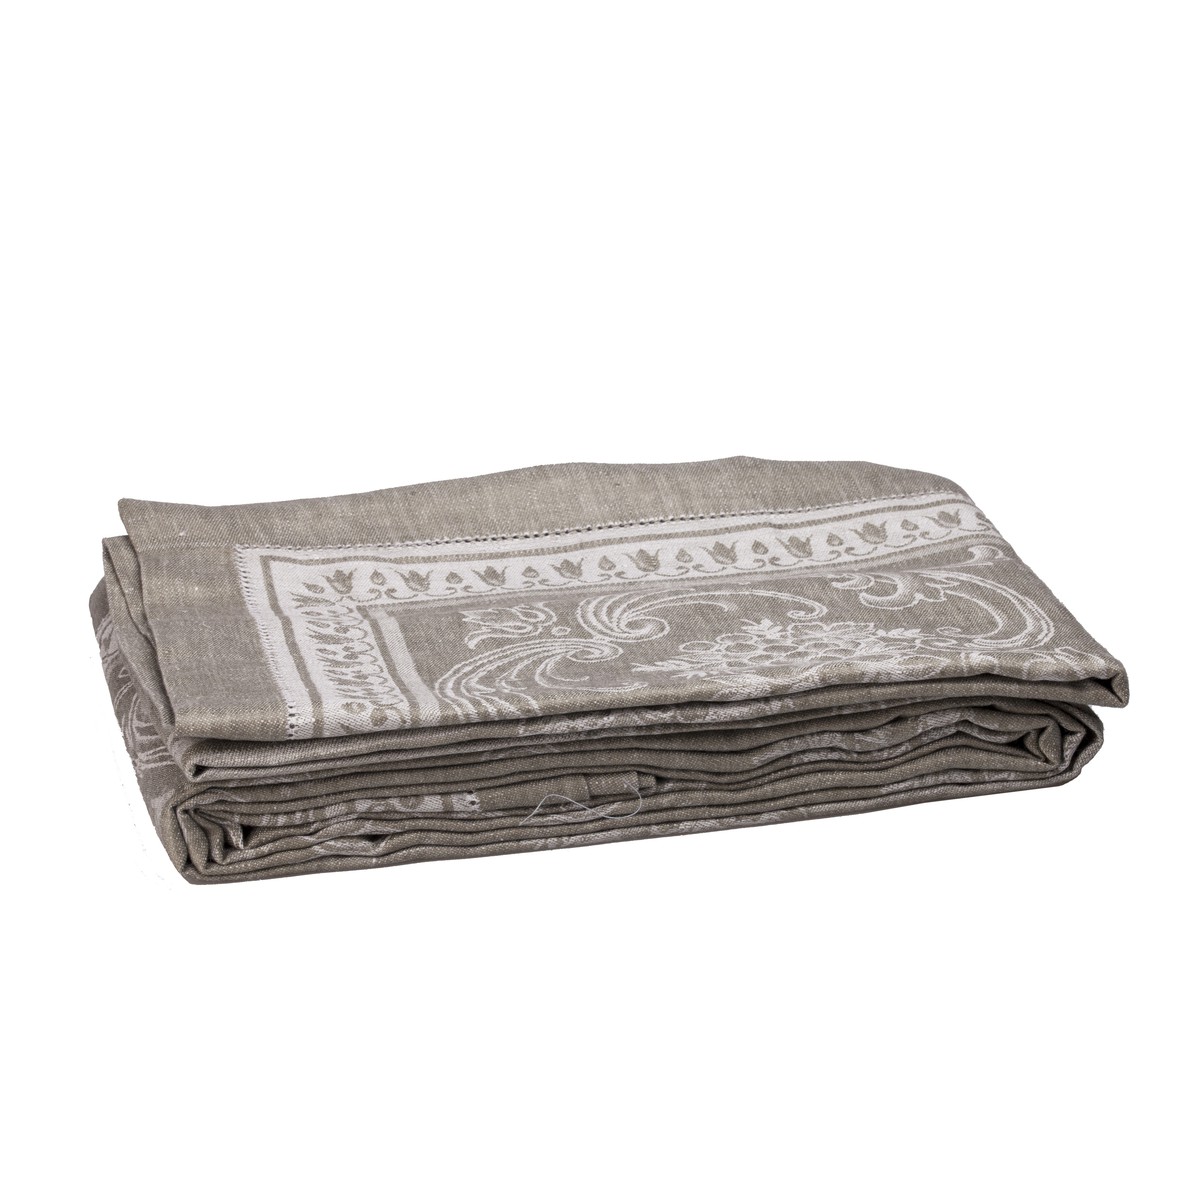  FRENCH MELODY Nappe Jacquard French Melody 170x360cm Gris taupe 170x360cm